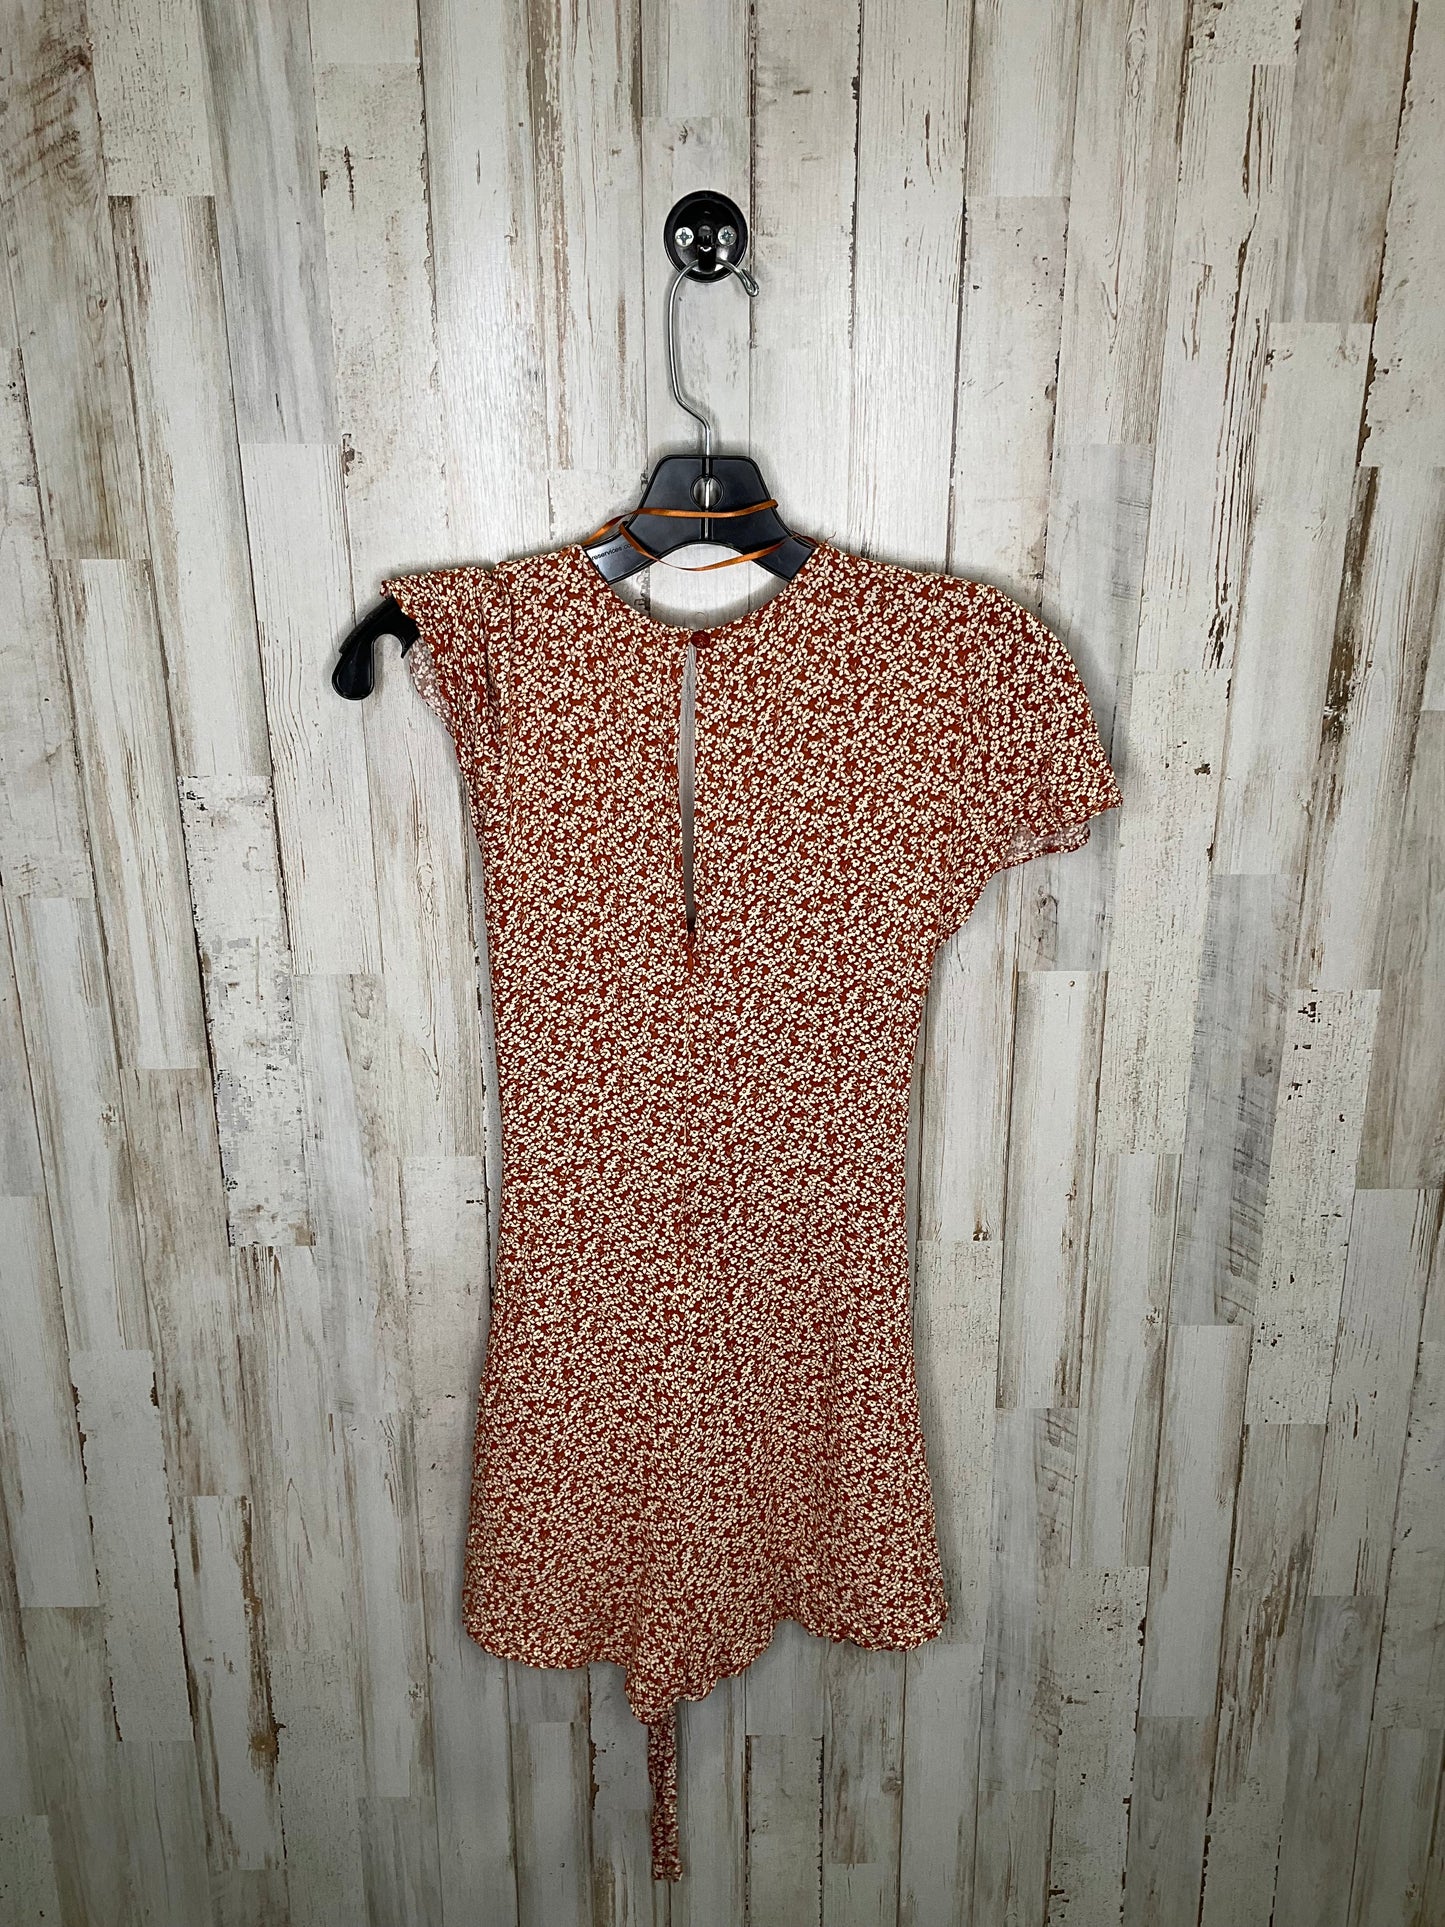 Dress Casual Short By Clothes Mentor  Size: M